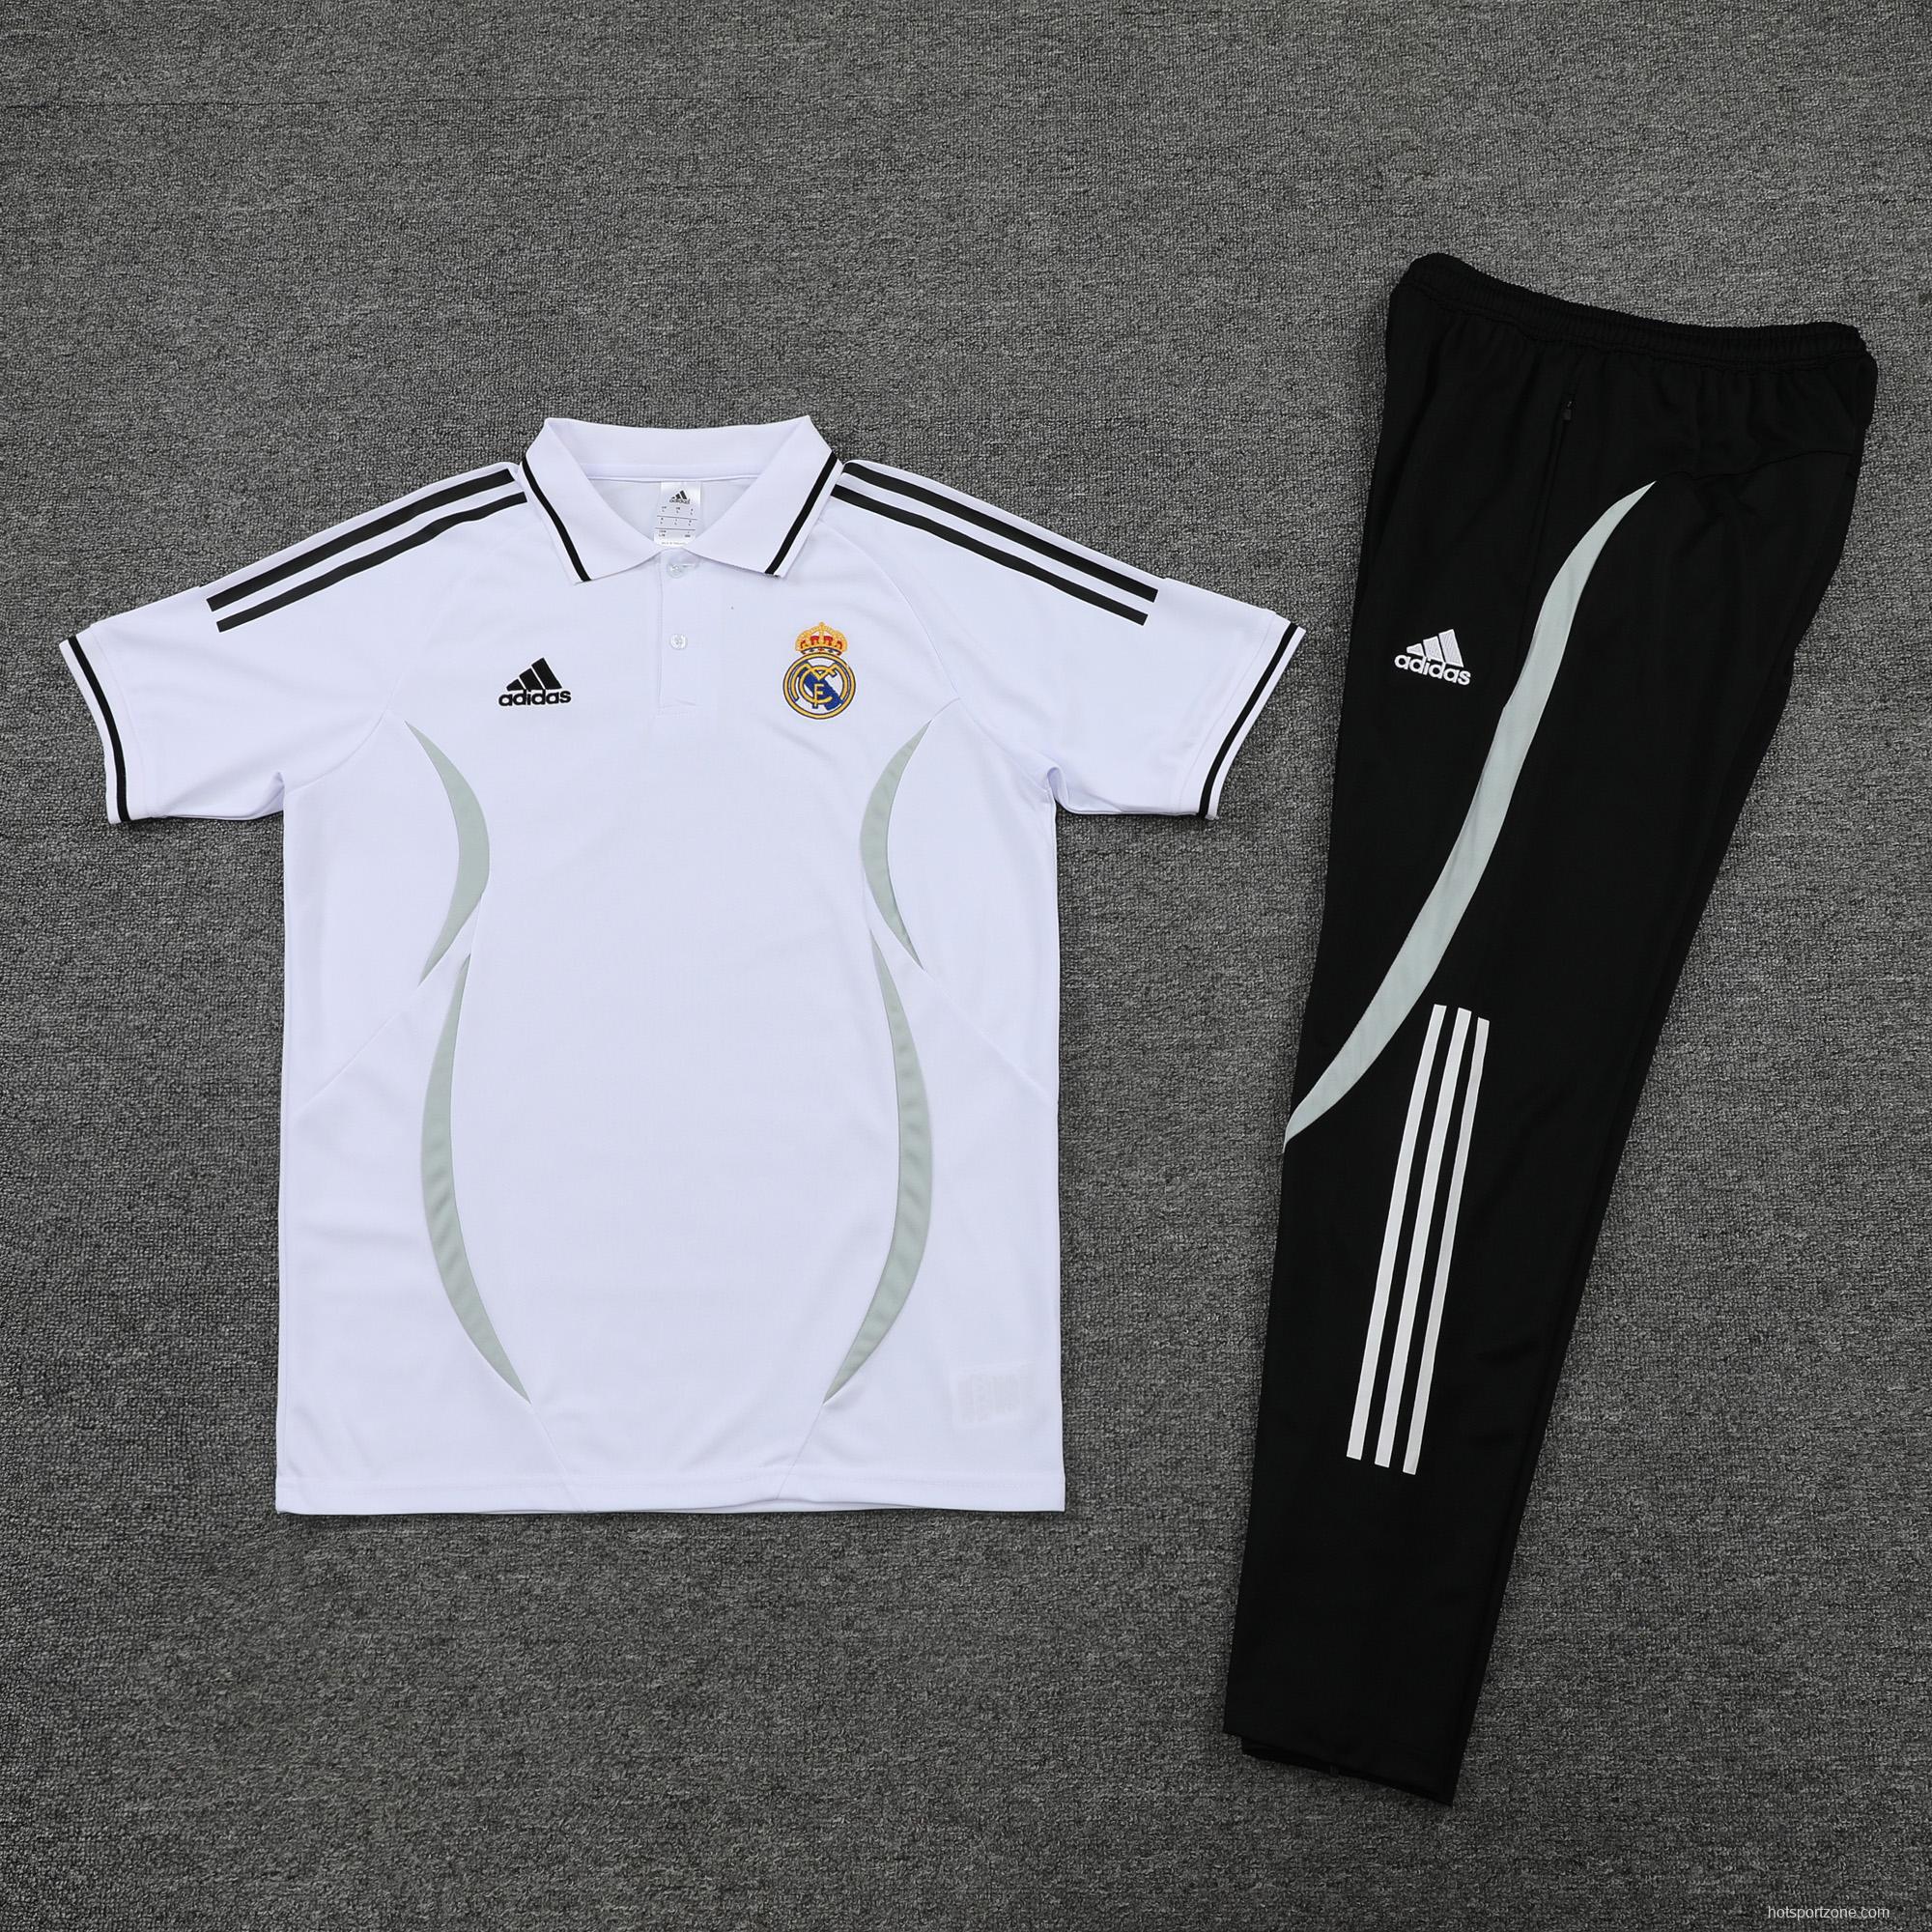 Real Madrid POLO kit white (not sold separately)